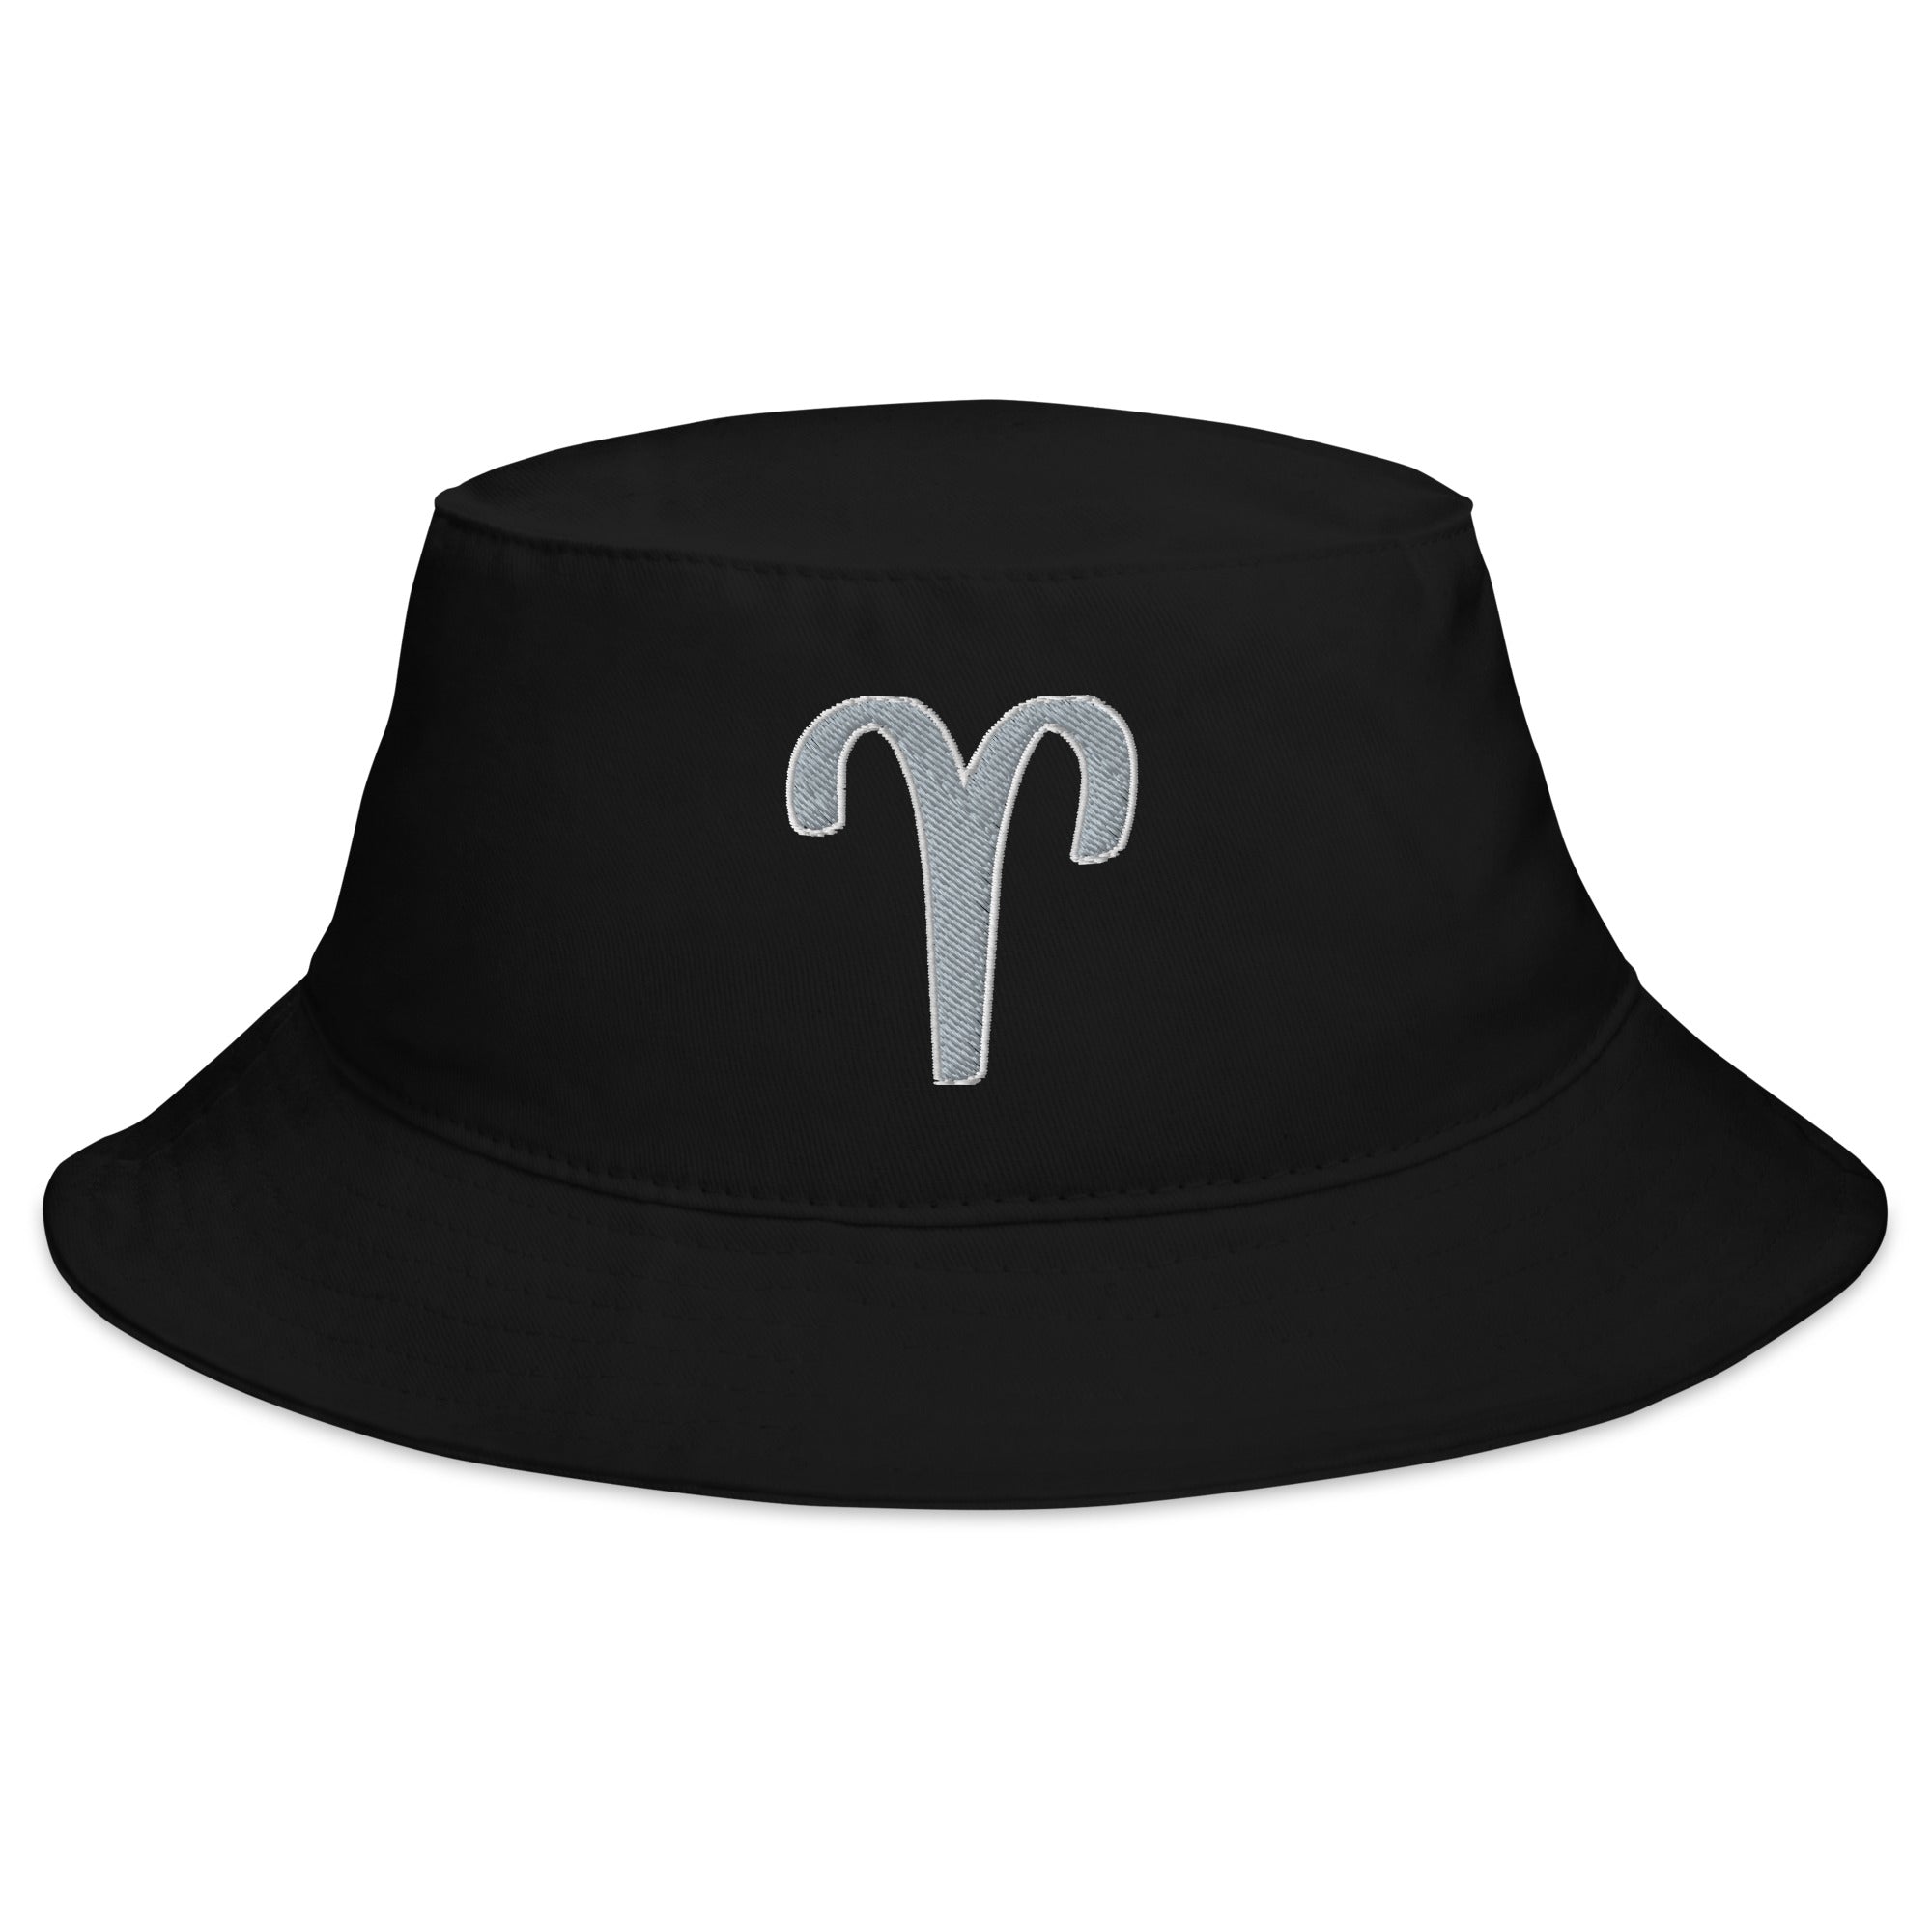 Zodiac Sign Aries Embroidered Bucket Hat Astrology Horoscope